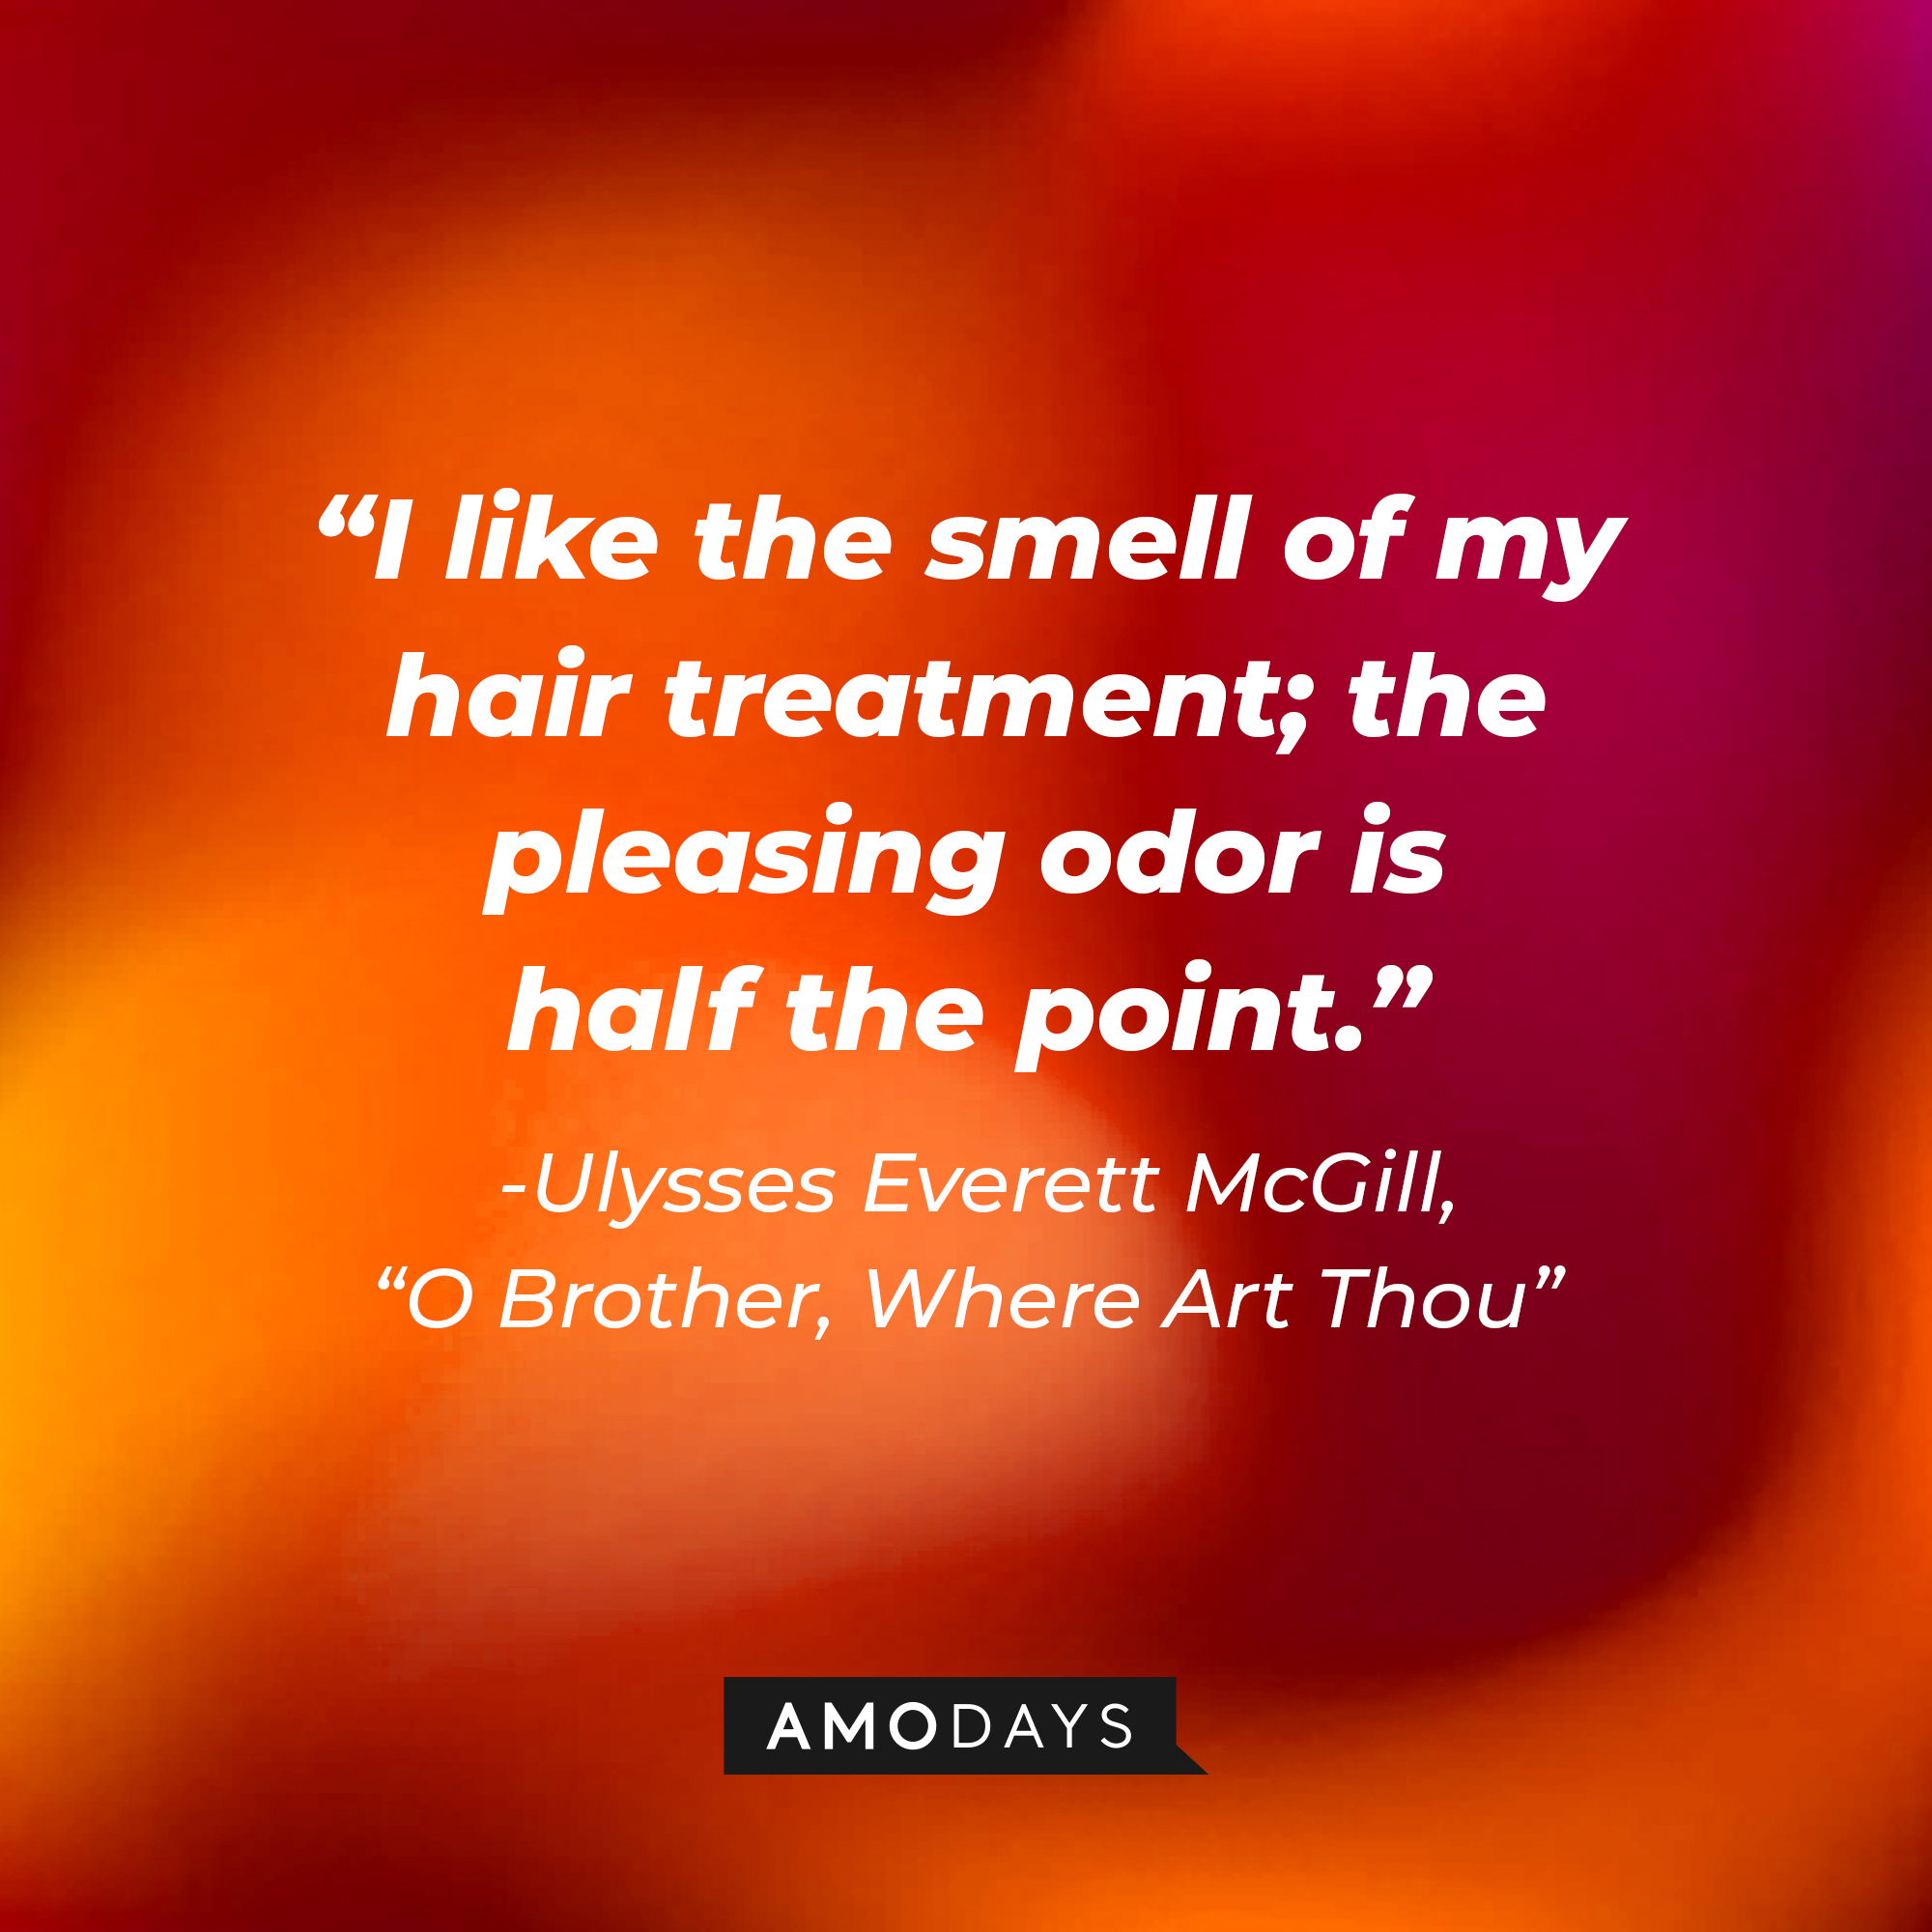 Ulysses Everett McGill's quote in "O Brother, Where Art Thou:" "I like the smell of my hair treatment; the pleasing odor is half the point." | Source: AmoDays